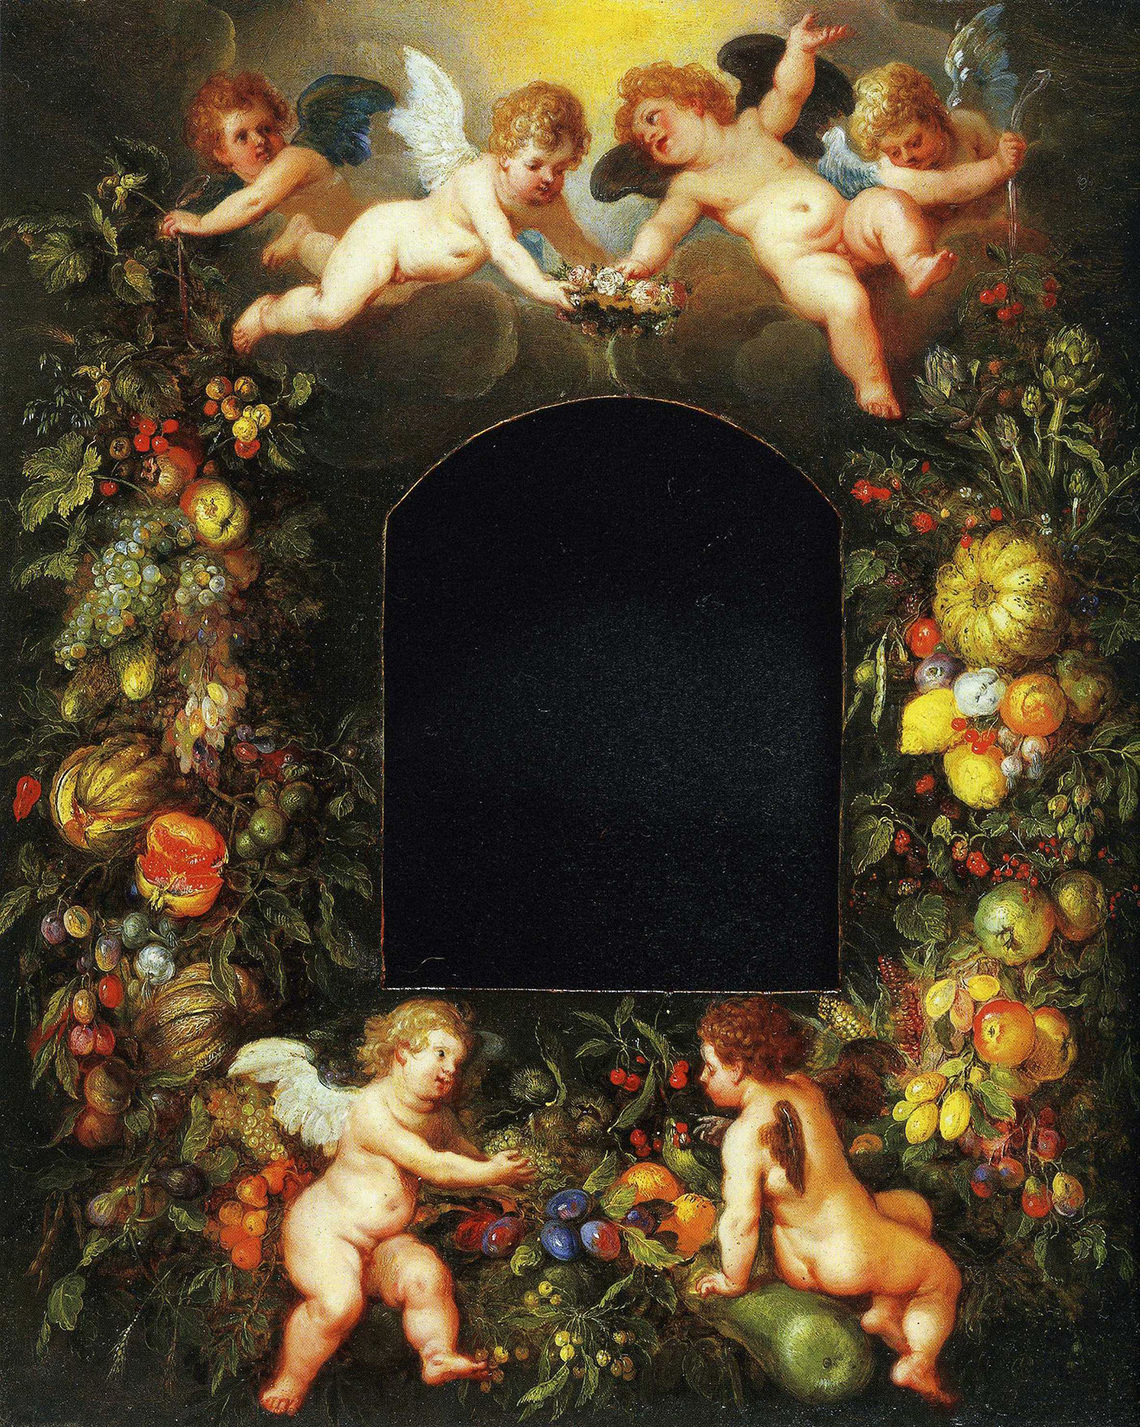 Angels with Fruit Garland (Germany)